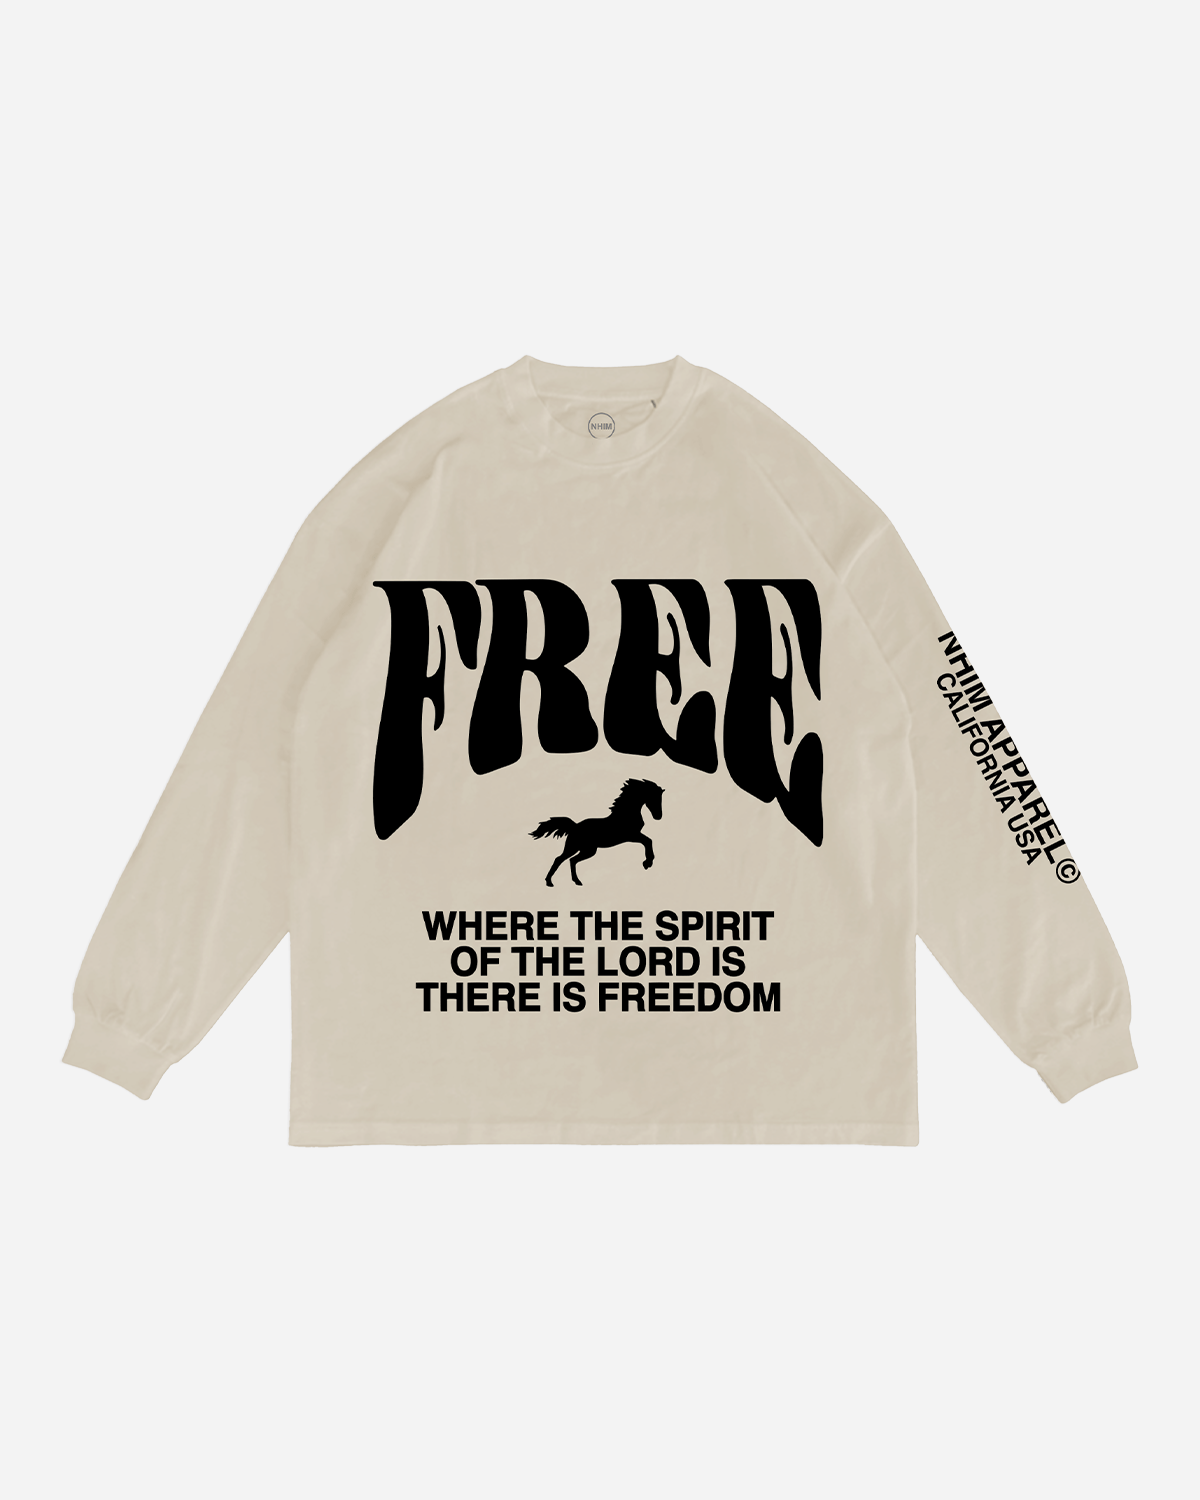 Christian long-sleeve shirt - where the Spirit of the Lord is there is freedom - FREE horse